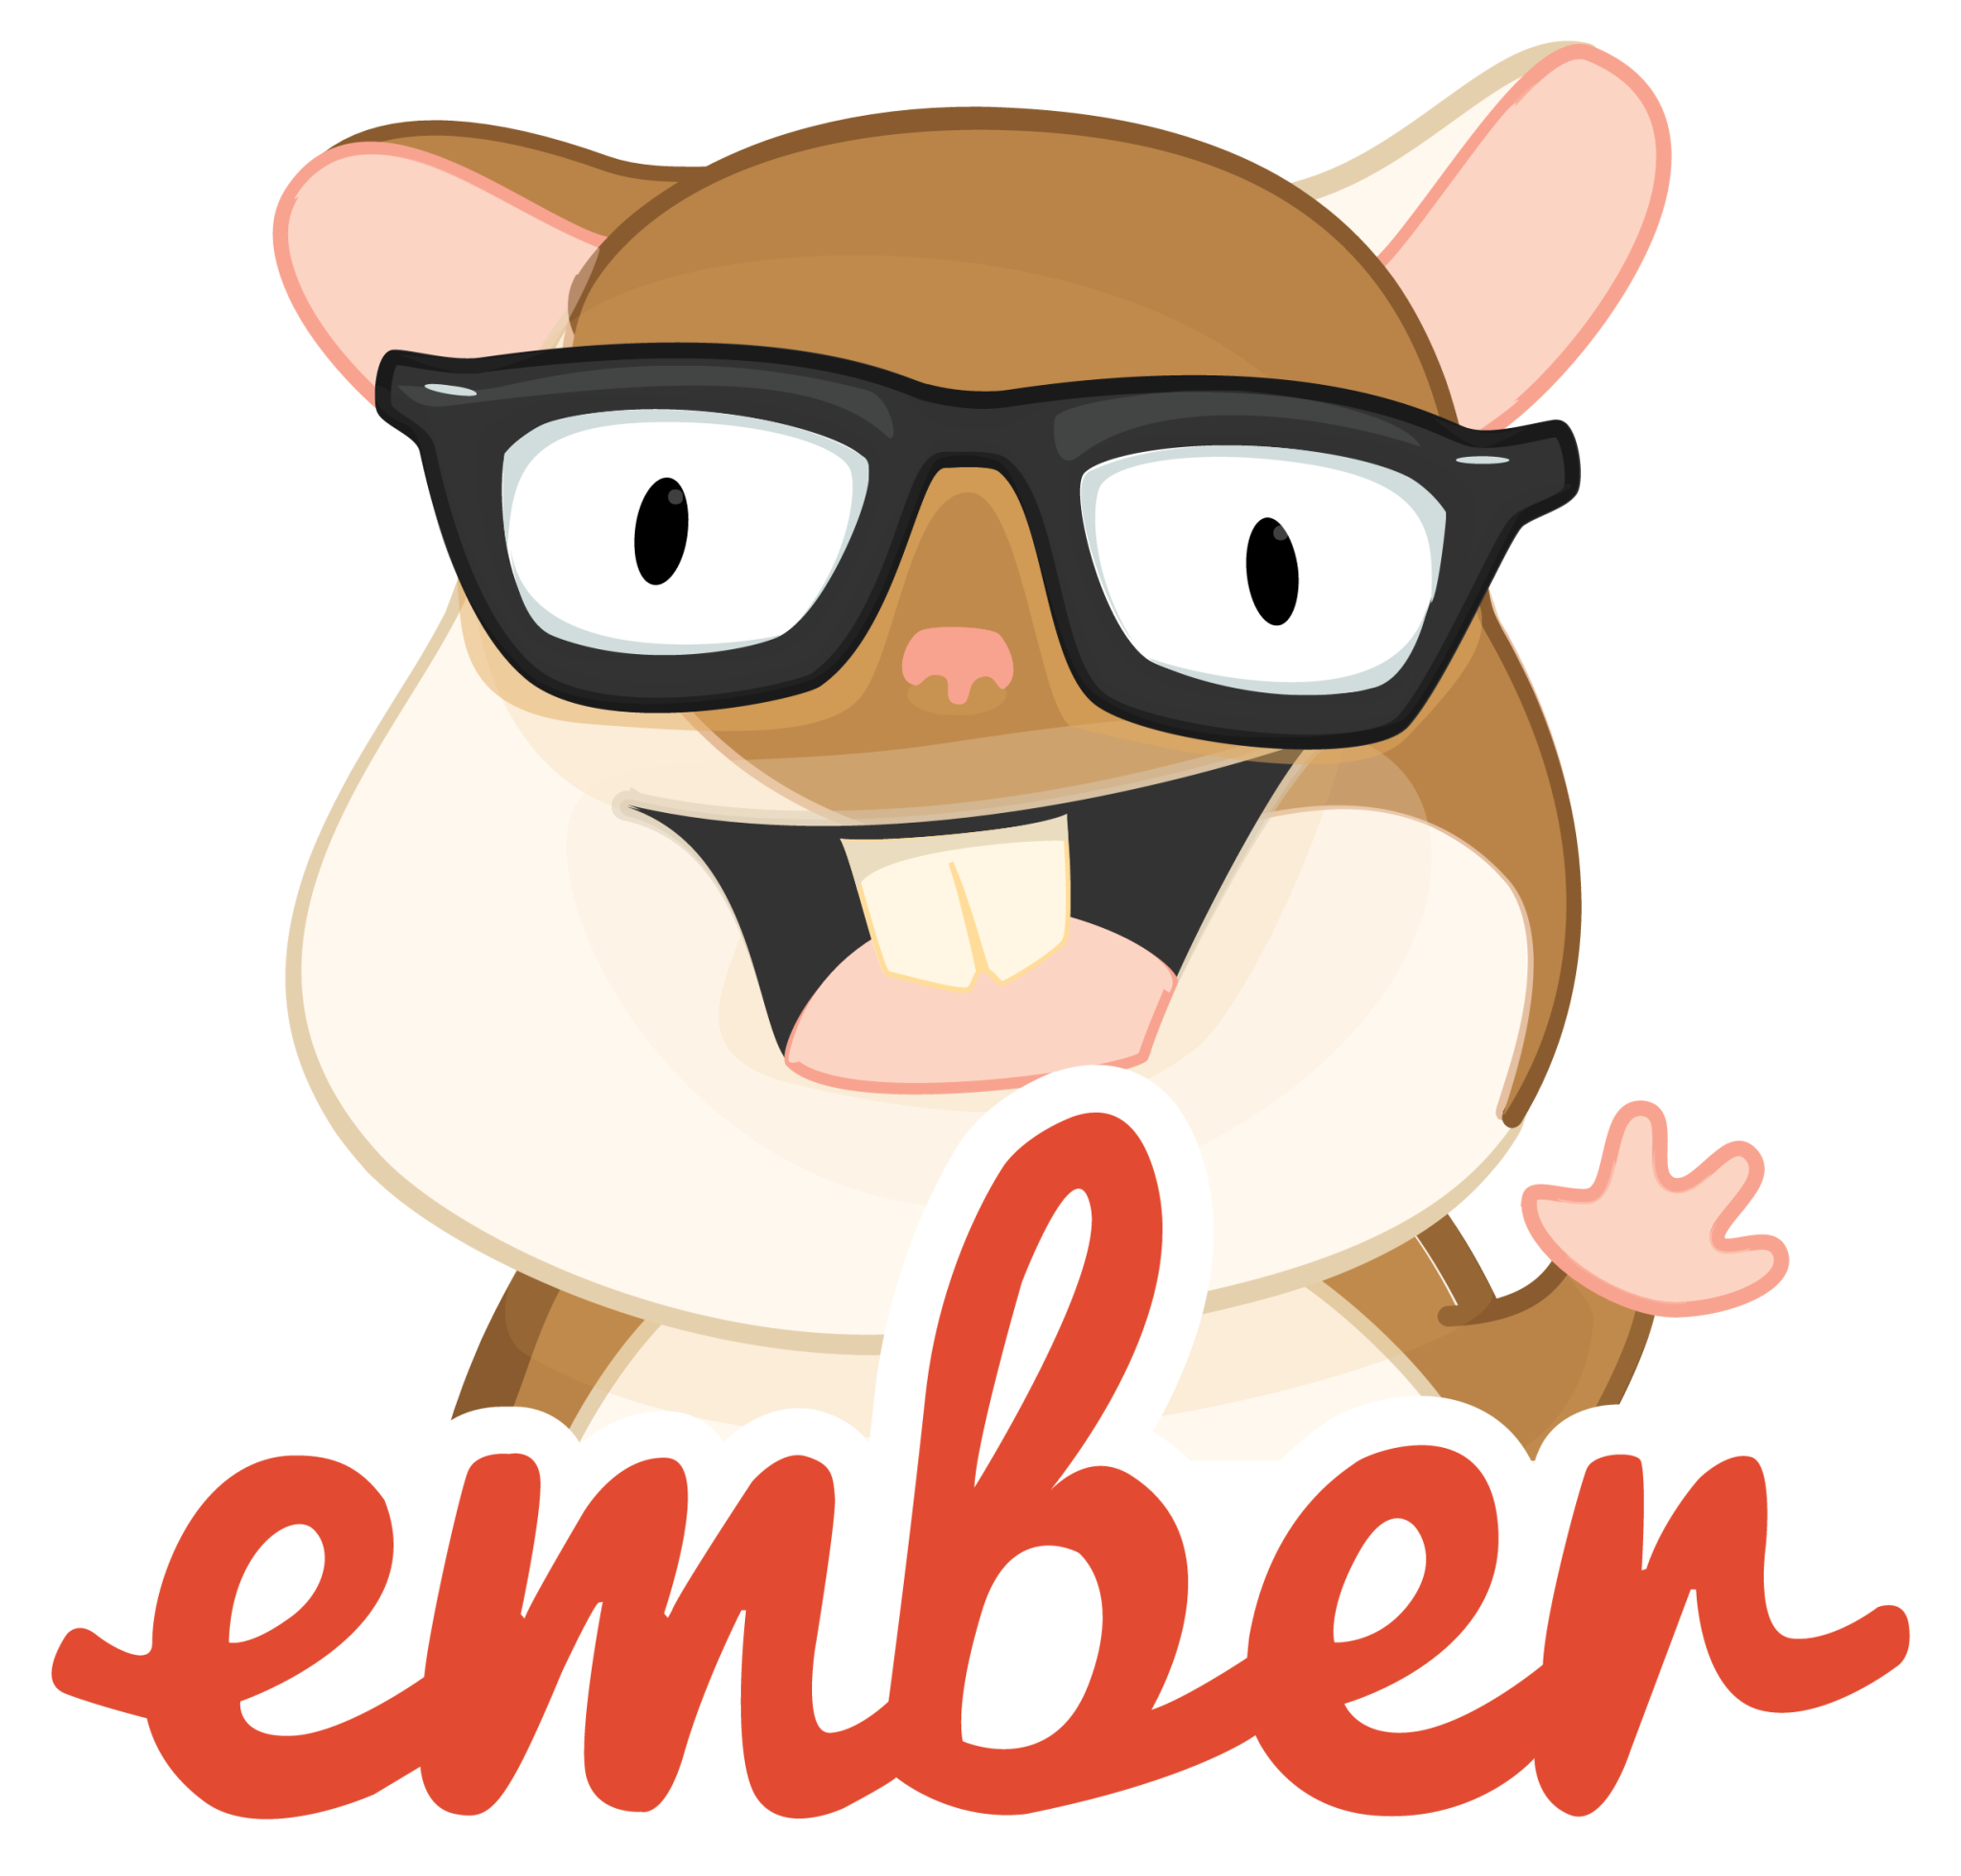 ember tomster icon